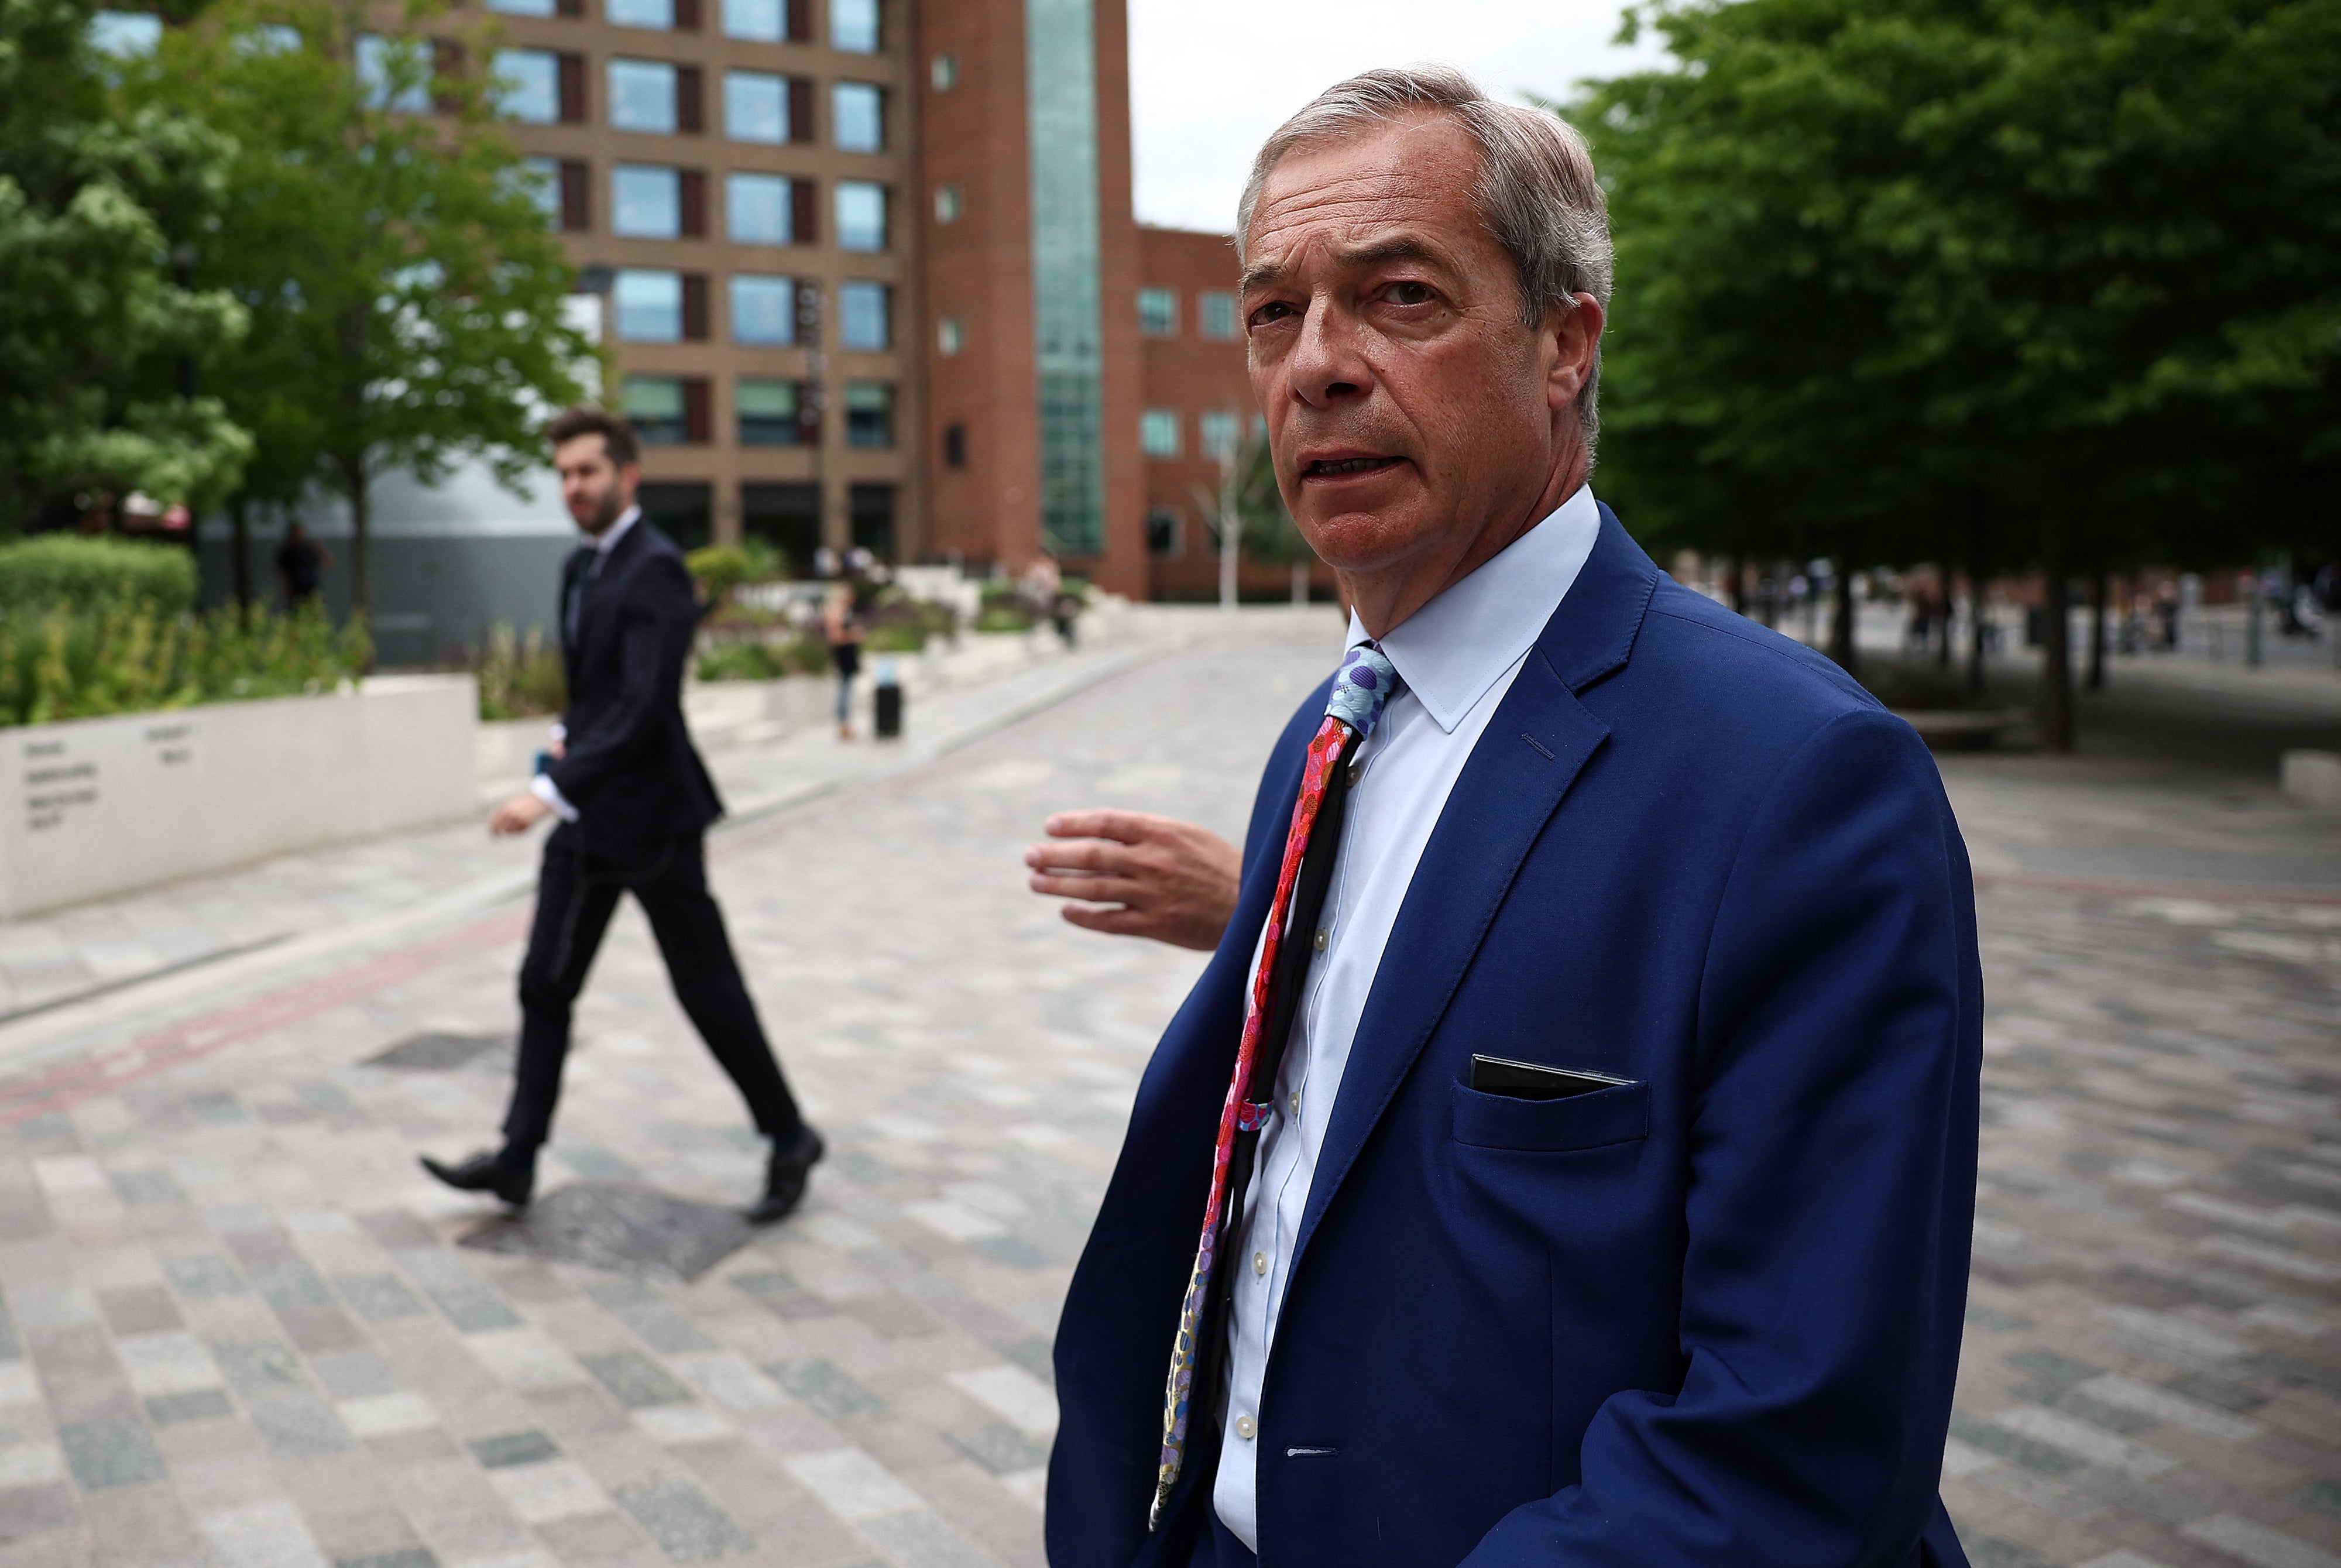 Nigel Farage’s suggestion the incident was a ‘set up’ were quickly shot down